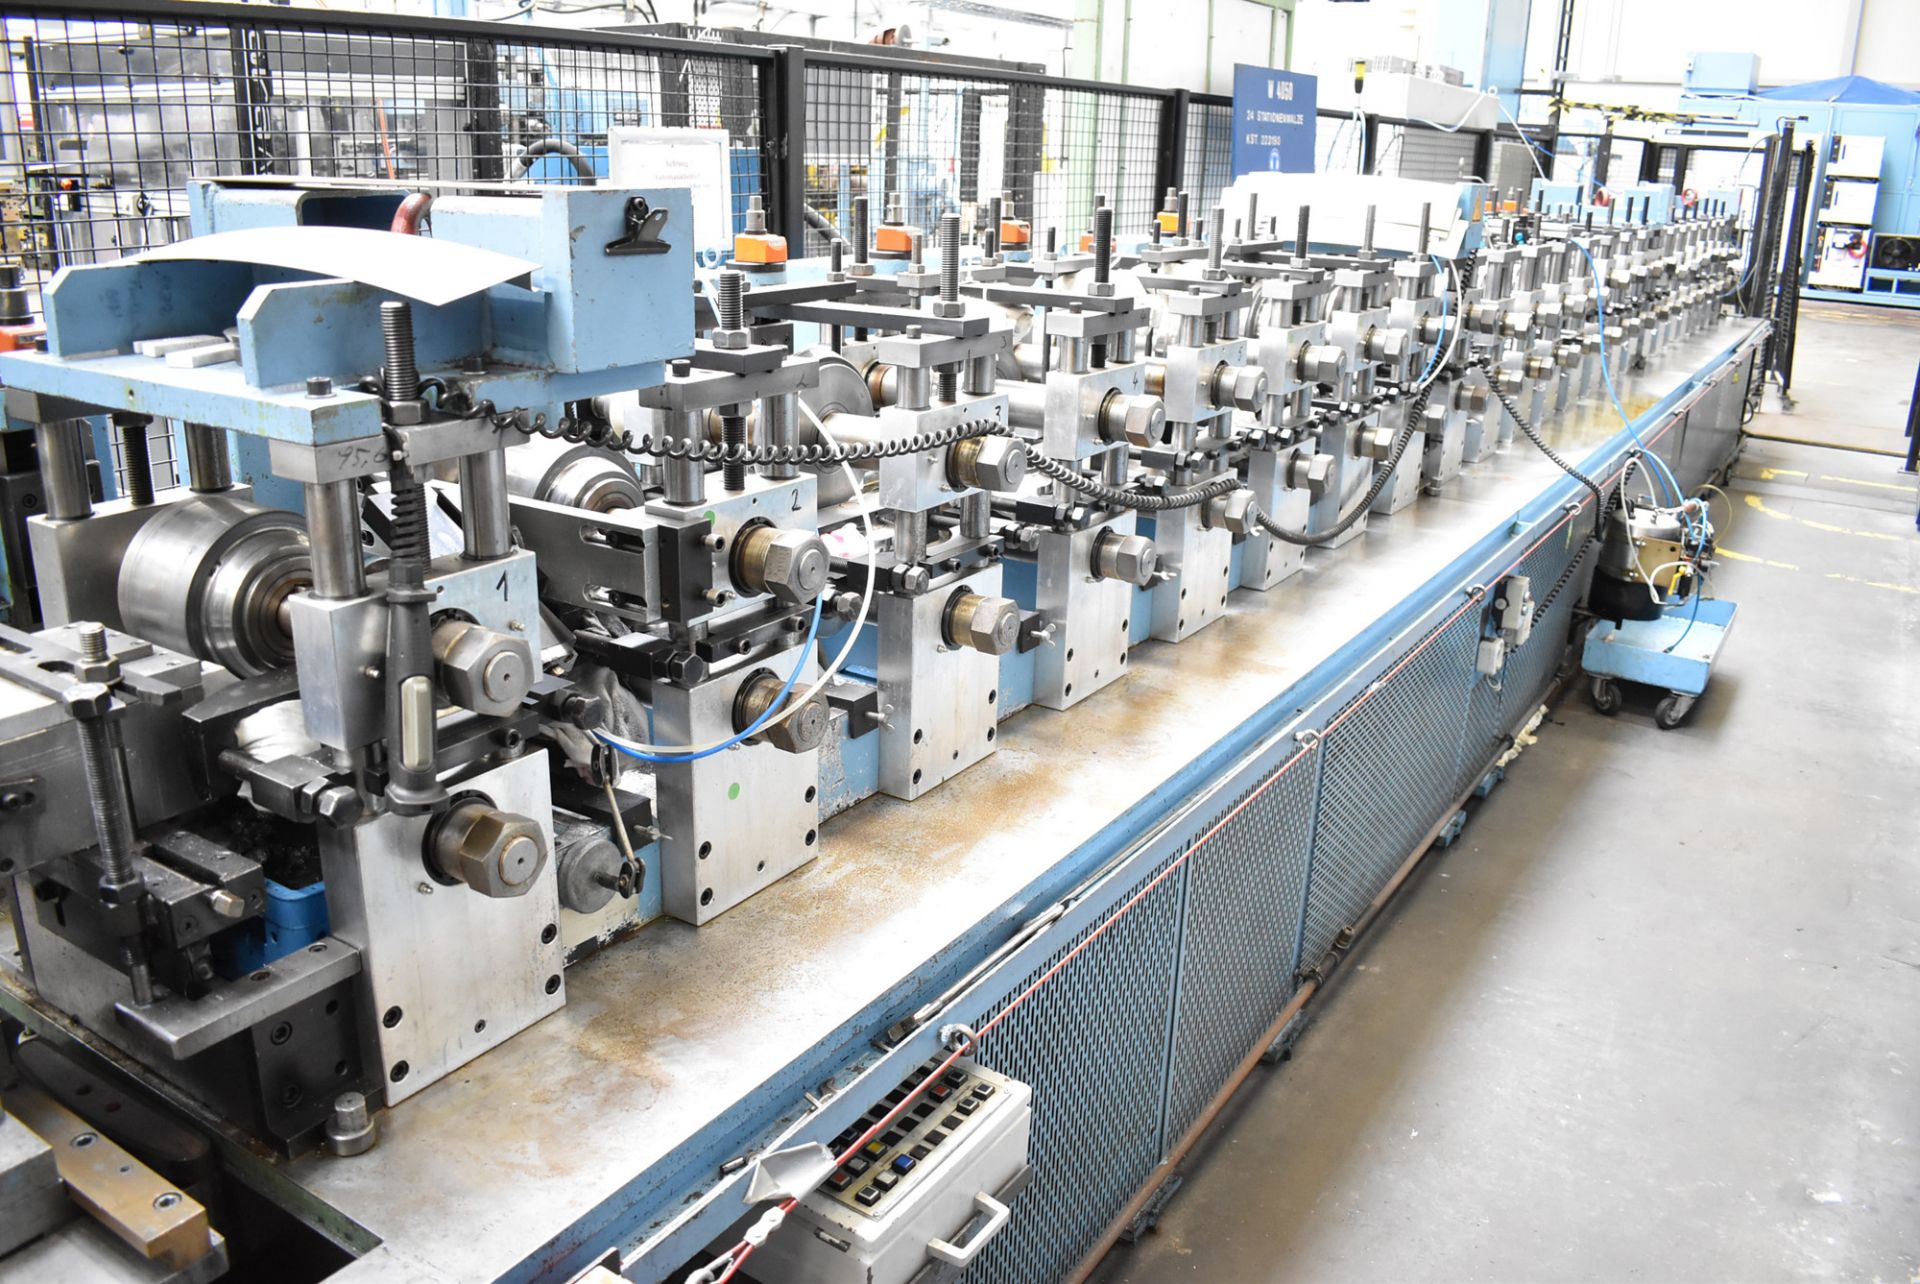 DURA 24 STAND MODULAR ROLL FORMING MACHINE WITH PLC CONTROL, 40 MM DIAMETER SPINDLES, 280 MM ROLL - Image 5 of 8